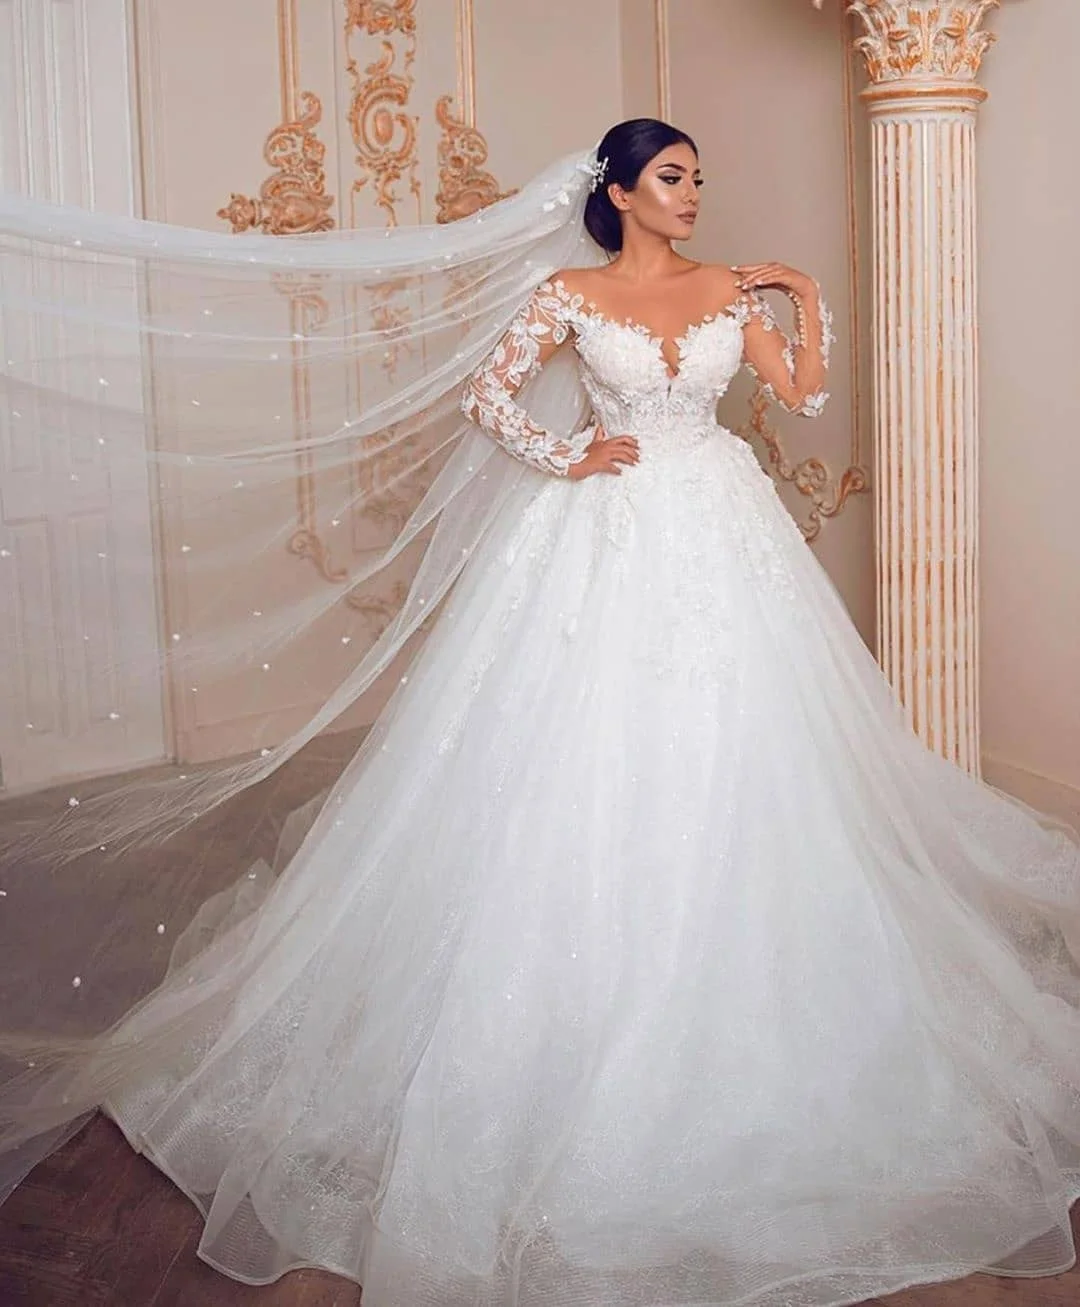 Elegant Ball Gown Big Wedding Dresses, Appliques Bridal Dress with Short  Sleeves PFW0376 | Robes de mariage princier, Robes de bal de mariage, Robe  de mariage manches